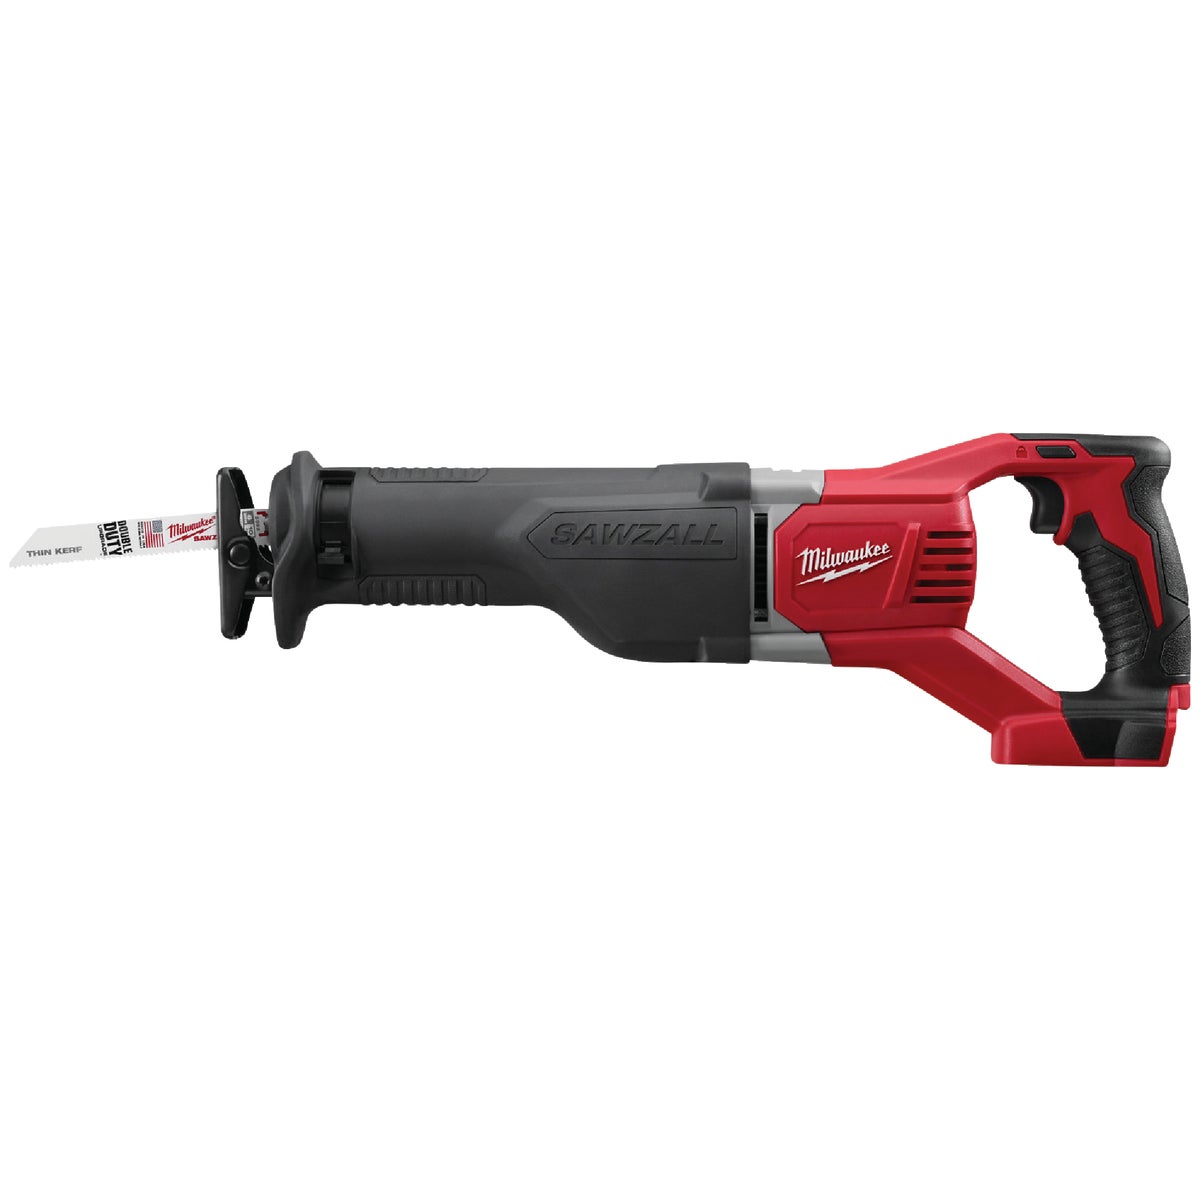 Milwaukee SAWZALL M18 18 Volt Lithium-Ion Cordless Reciprocating Saw (Tool Only)